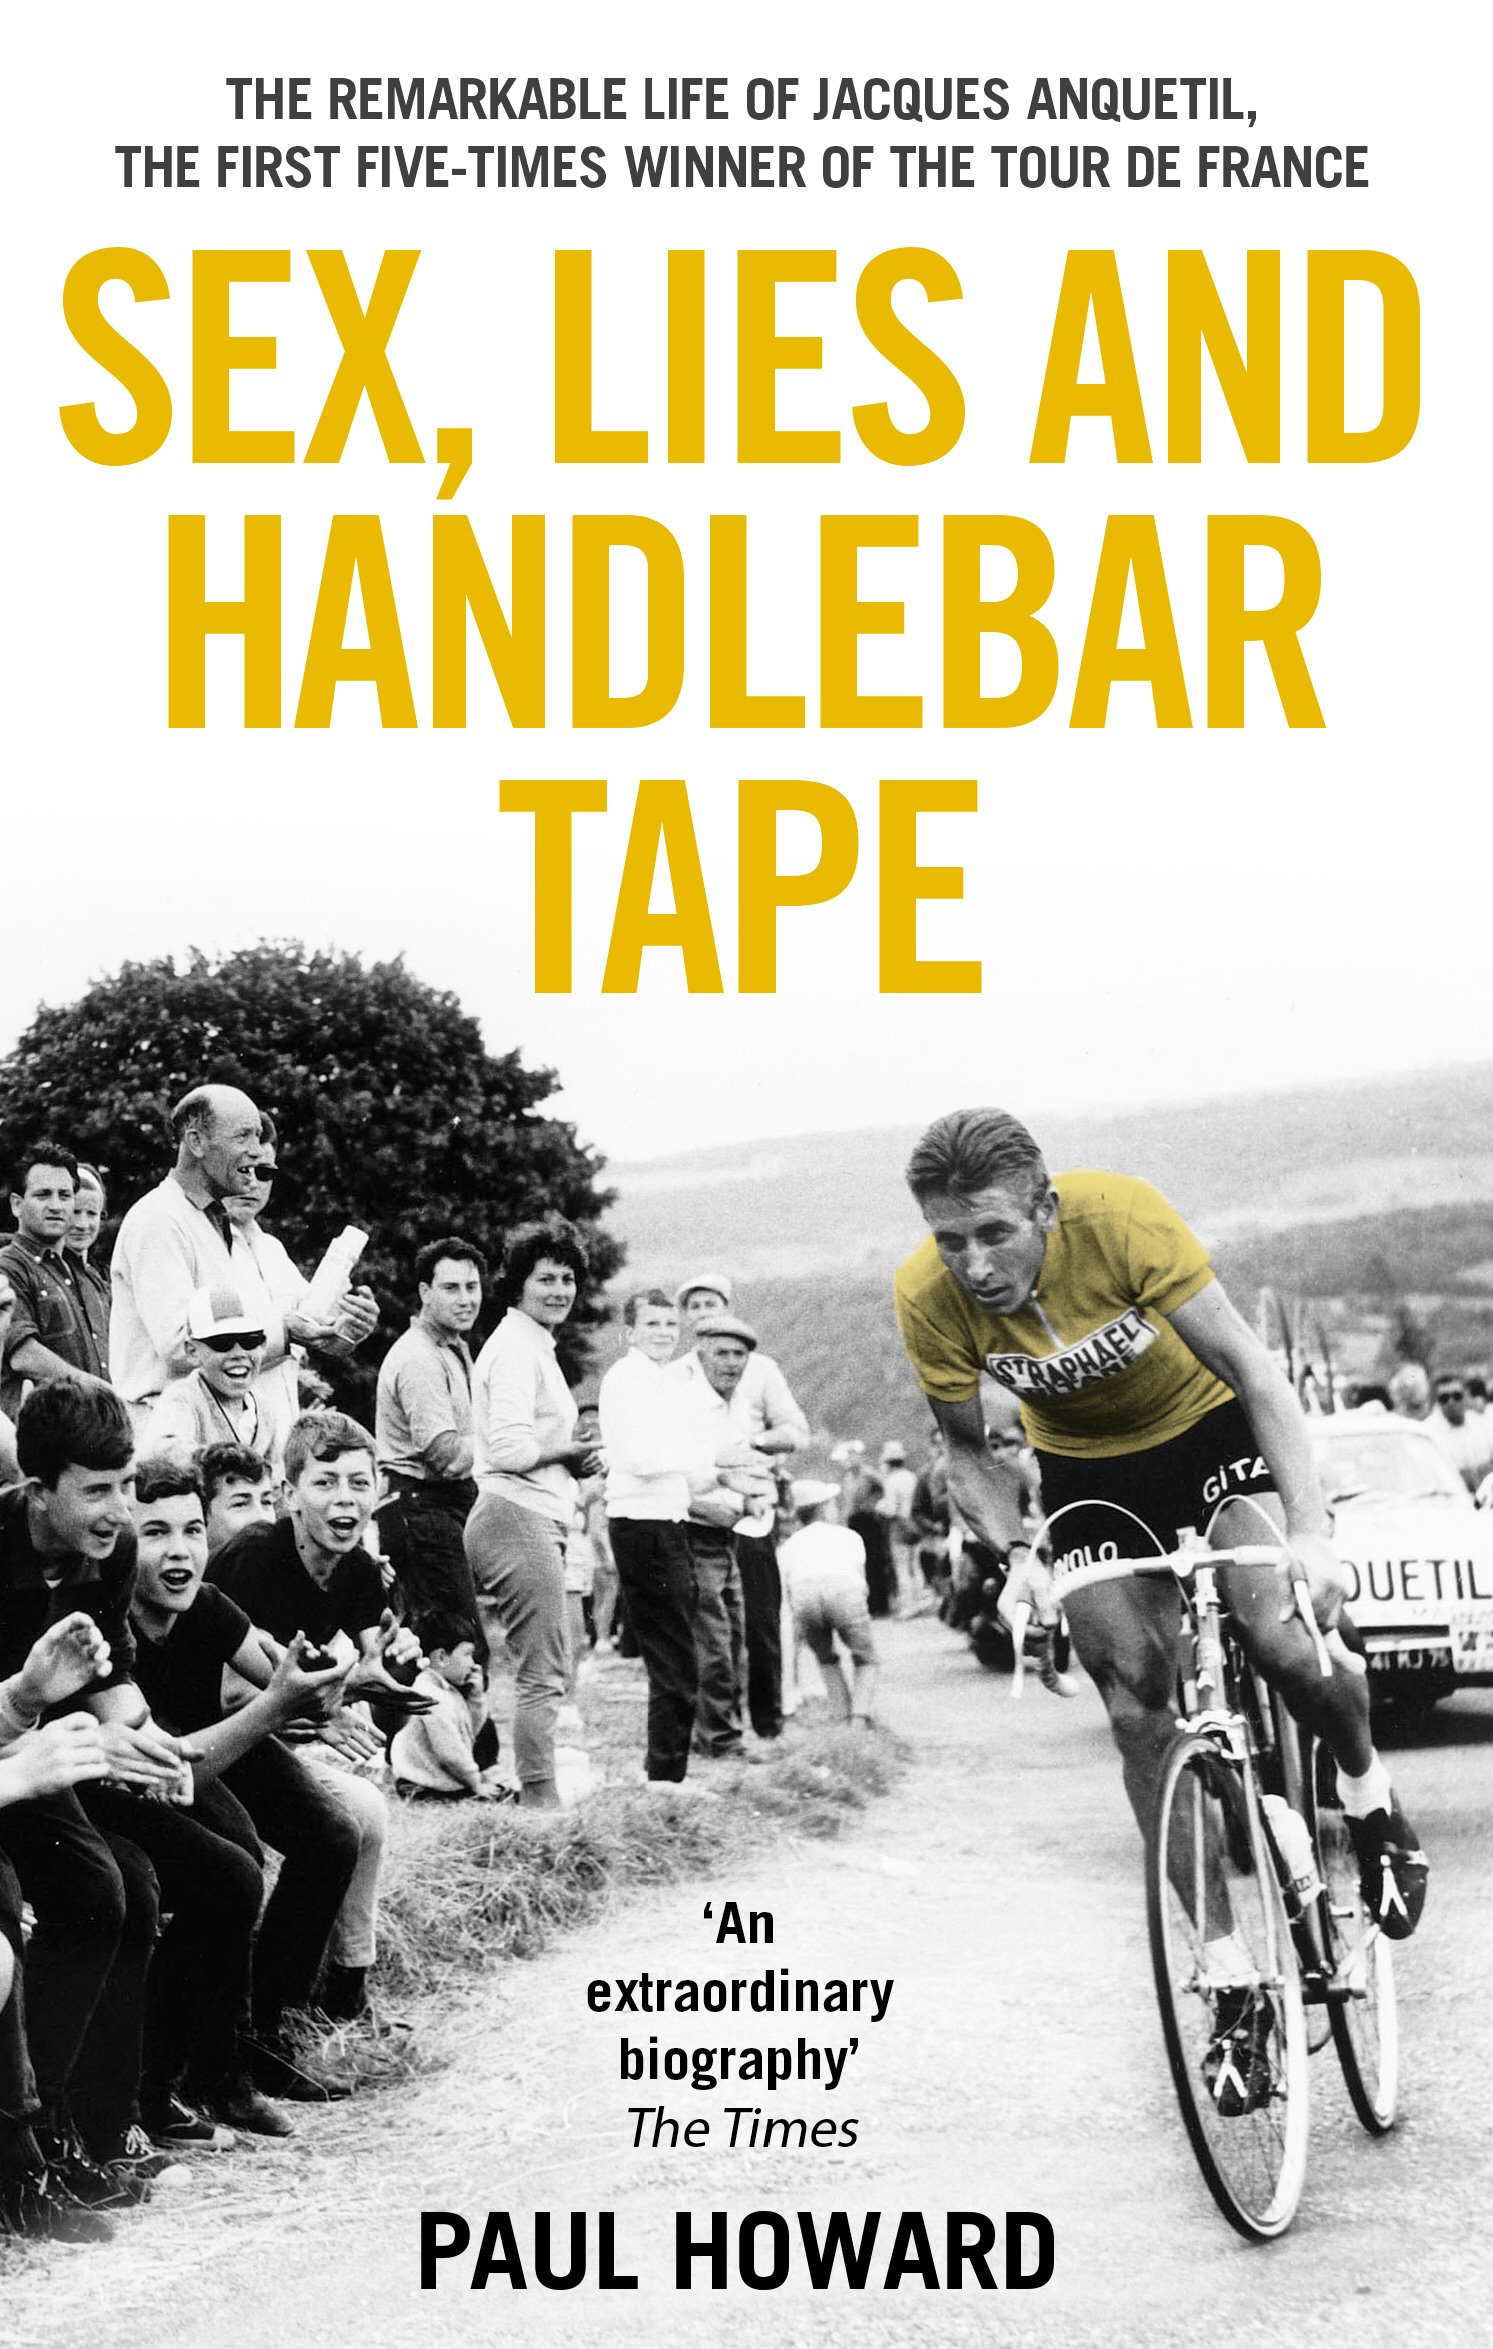 Sex, Lies and Handlebar Tape: The Remarkable Life of Jacques Anquetil, the First Five-Times Winner of the Tour de France